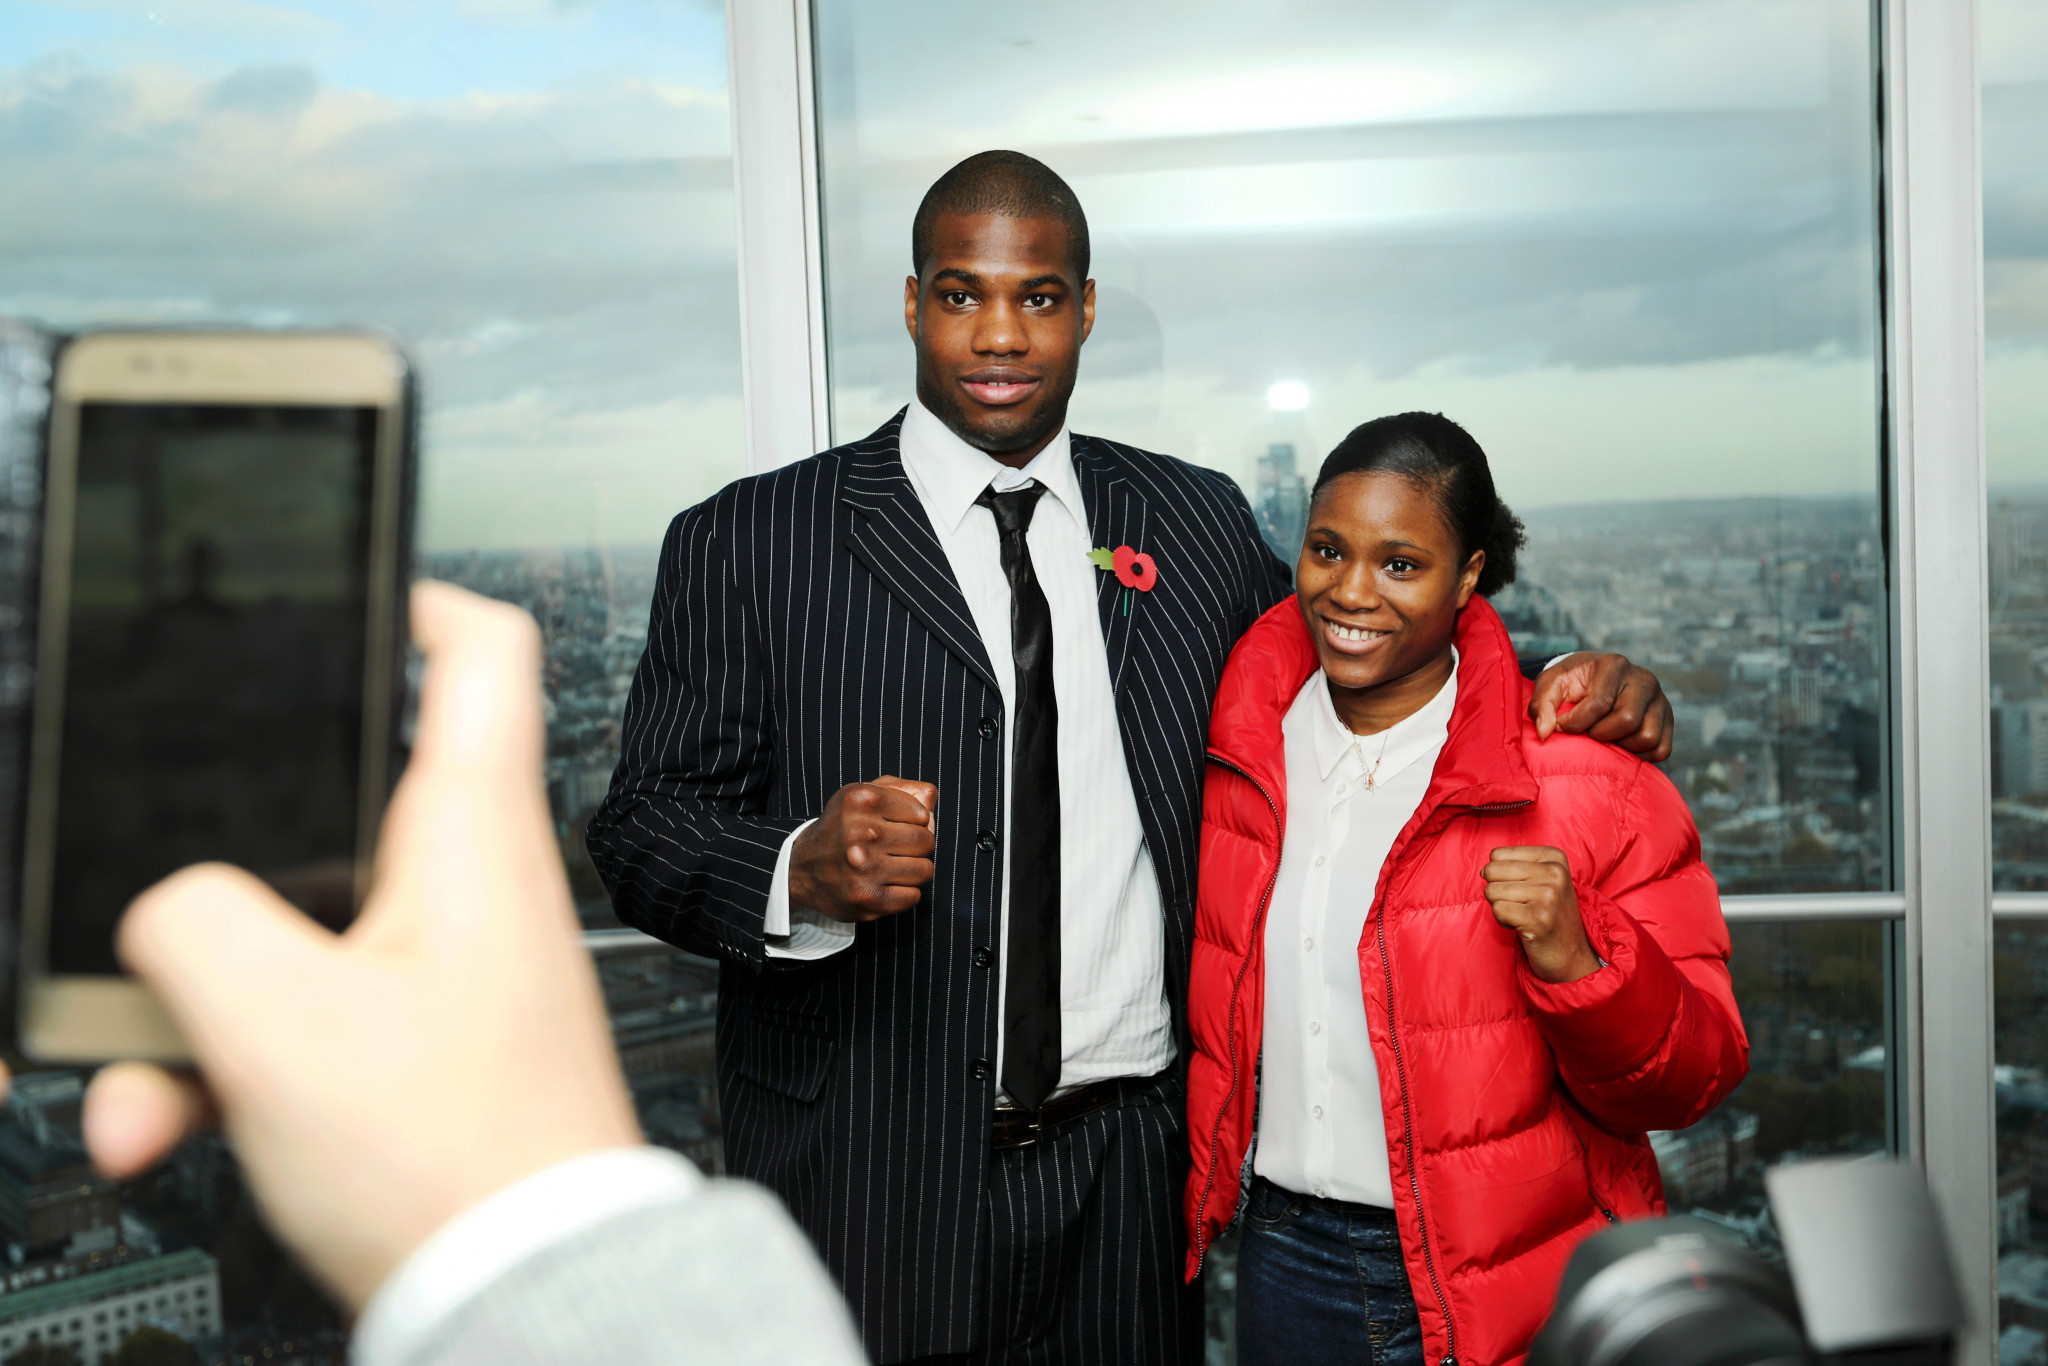 Siblings Daniel and Caroline Dubois are predicted to be two of boxing's hottest prospects over the next couple of years ©Getty Images